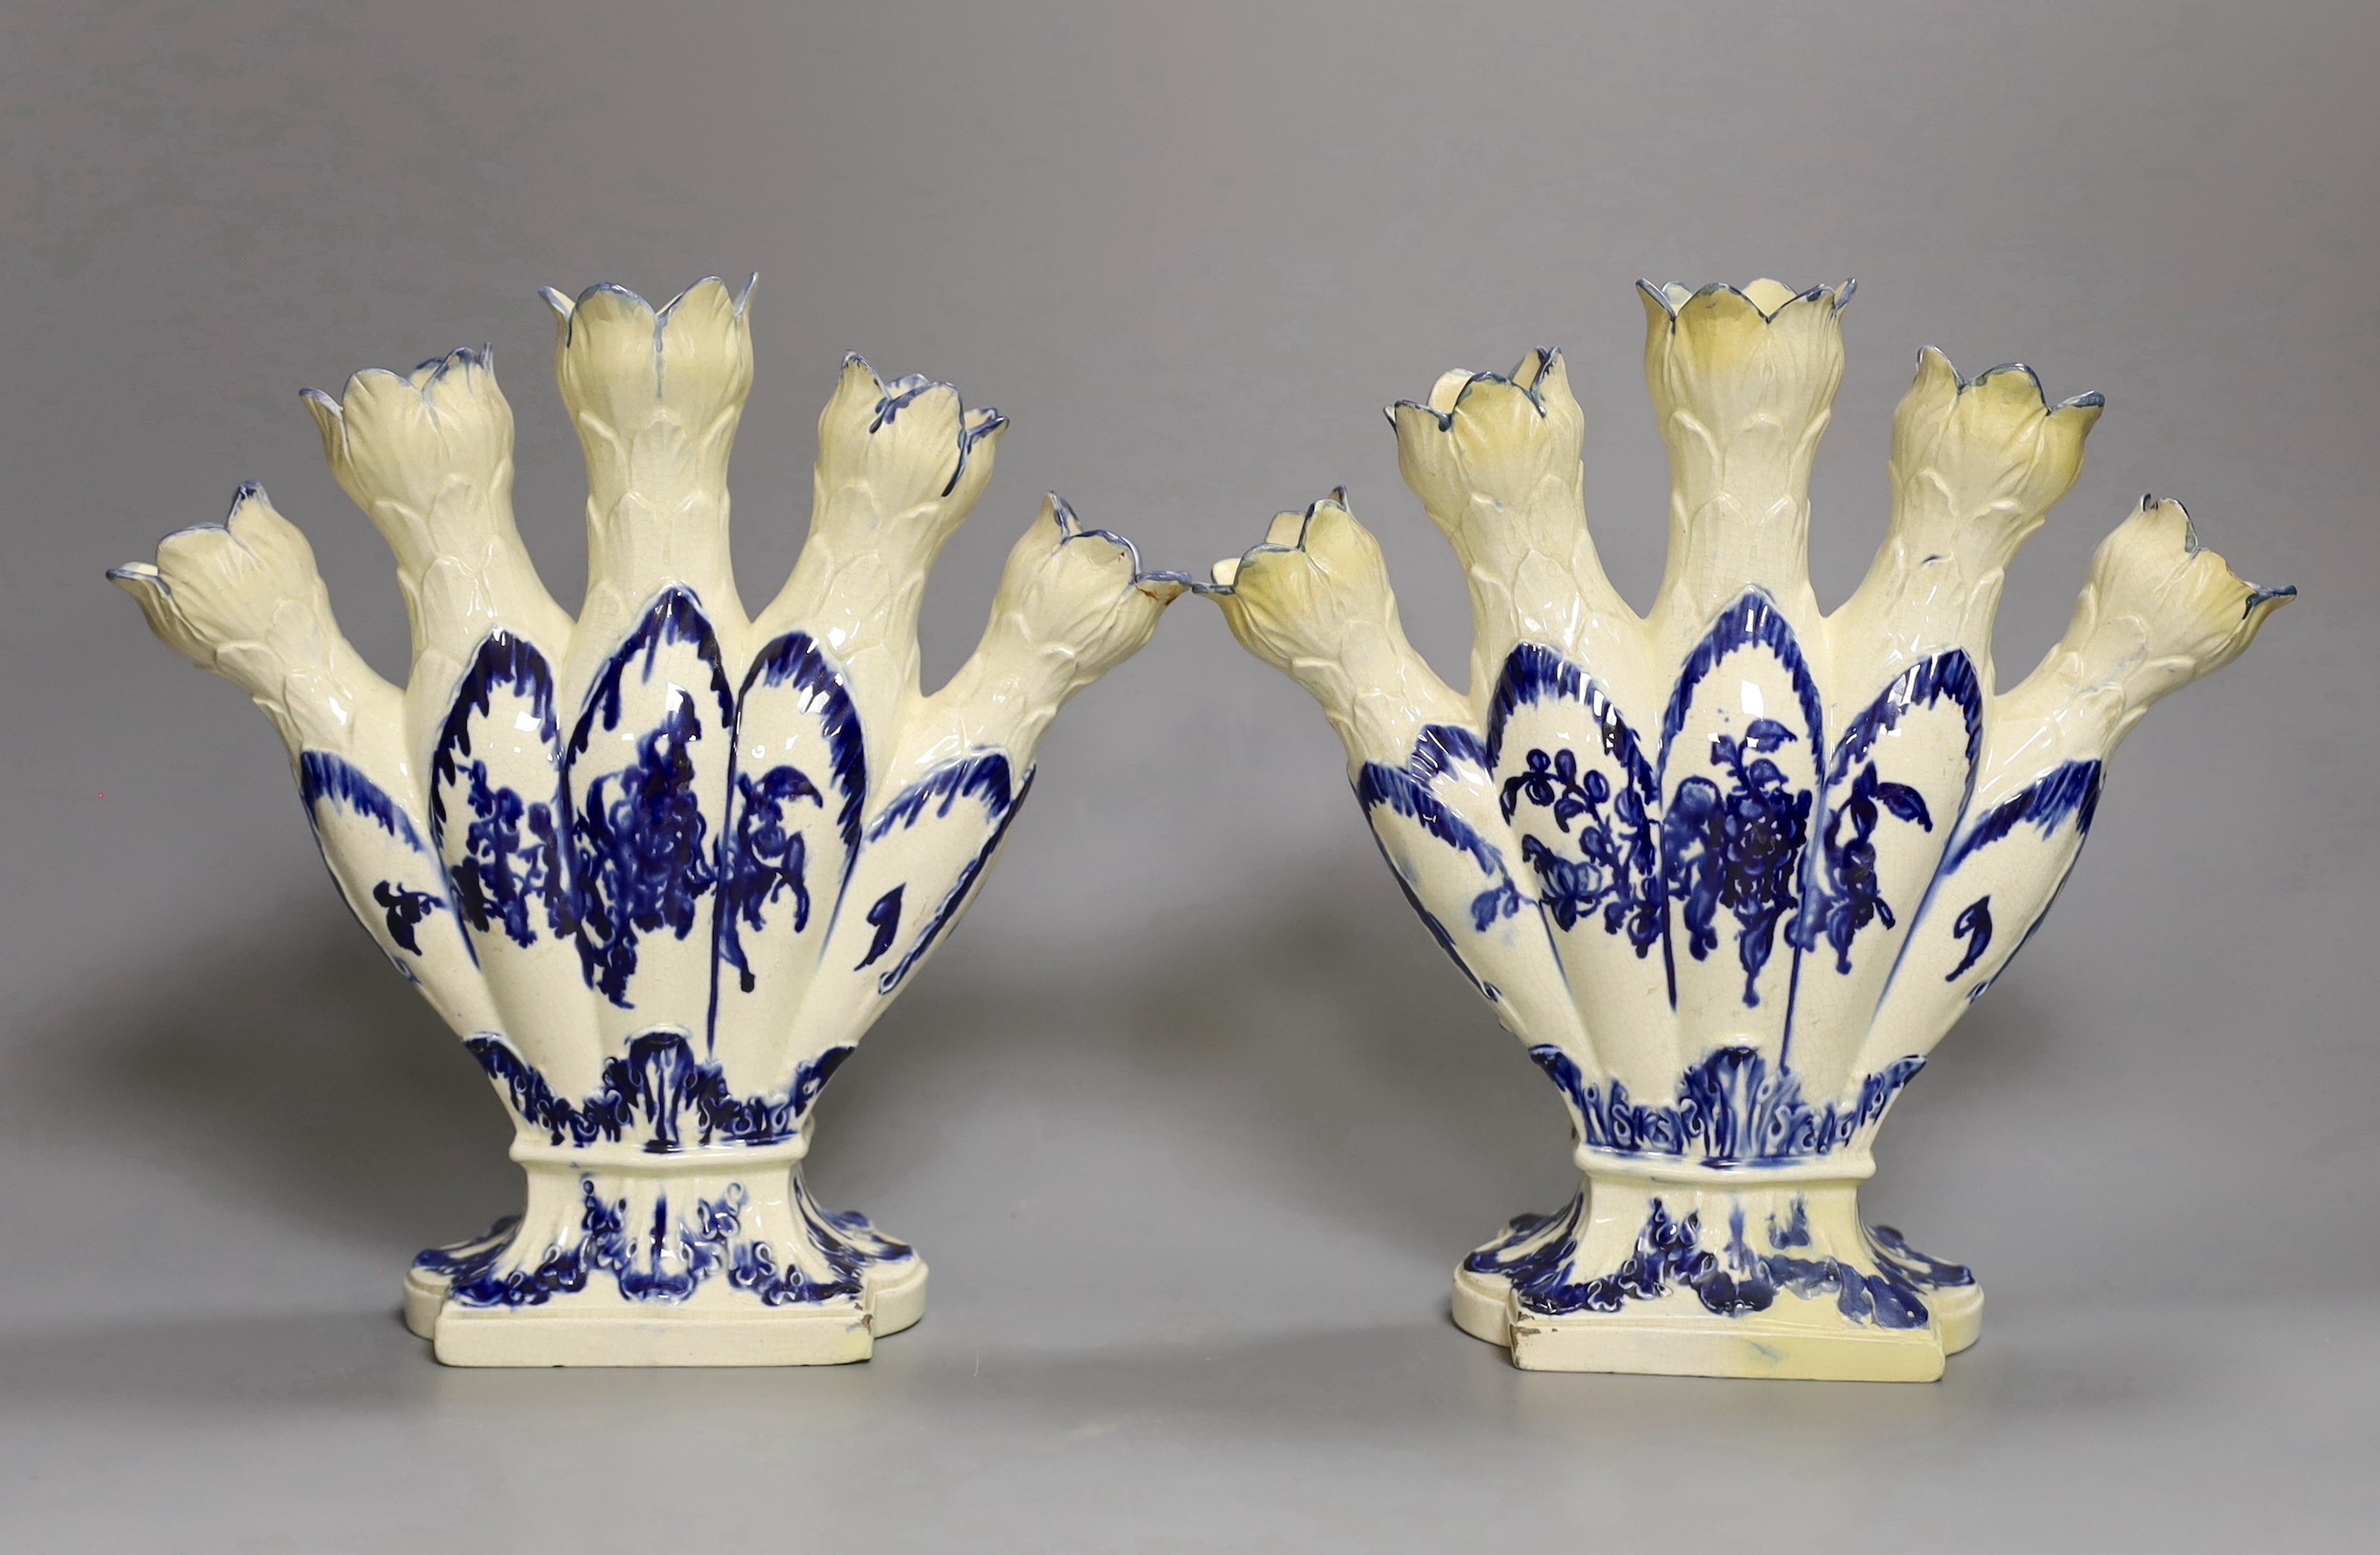 A pair of early 19th century Dutch Delft blue and white tulip vases, 22cm tall